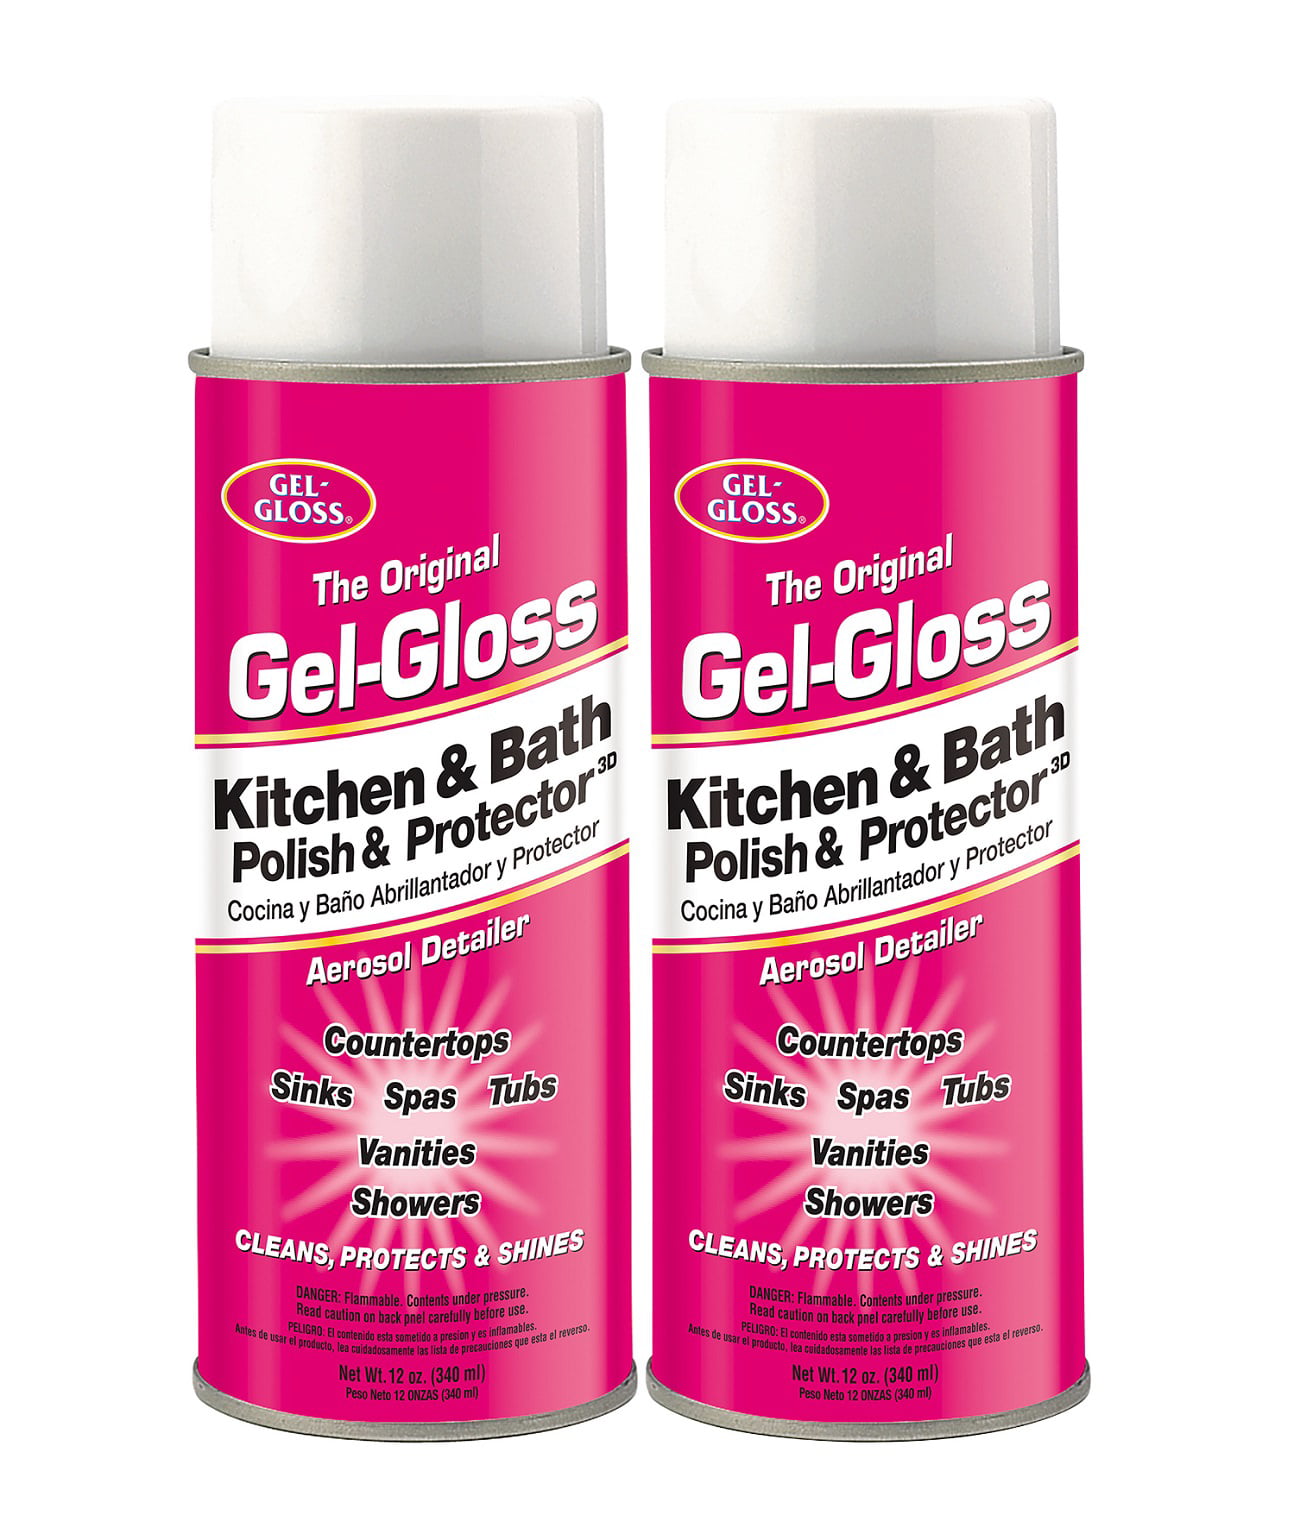 Gel- Gloss Original Kitchen and Bath/RV Polish and Protector Value Pack,  2-12 Ounce Aerosol Cans